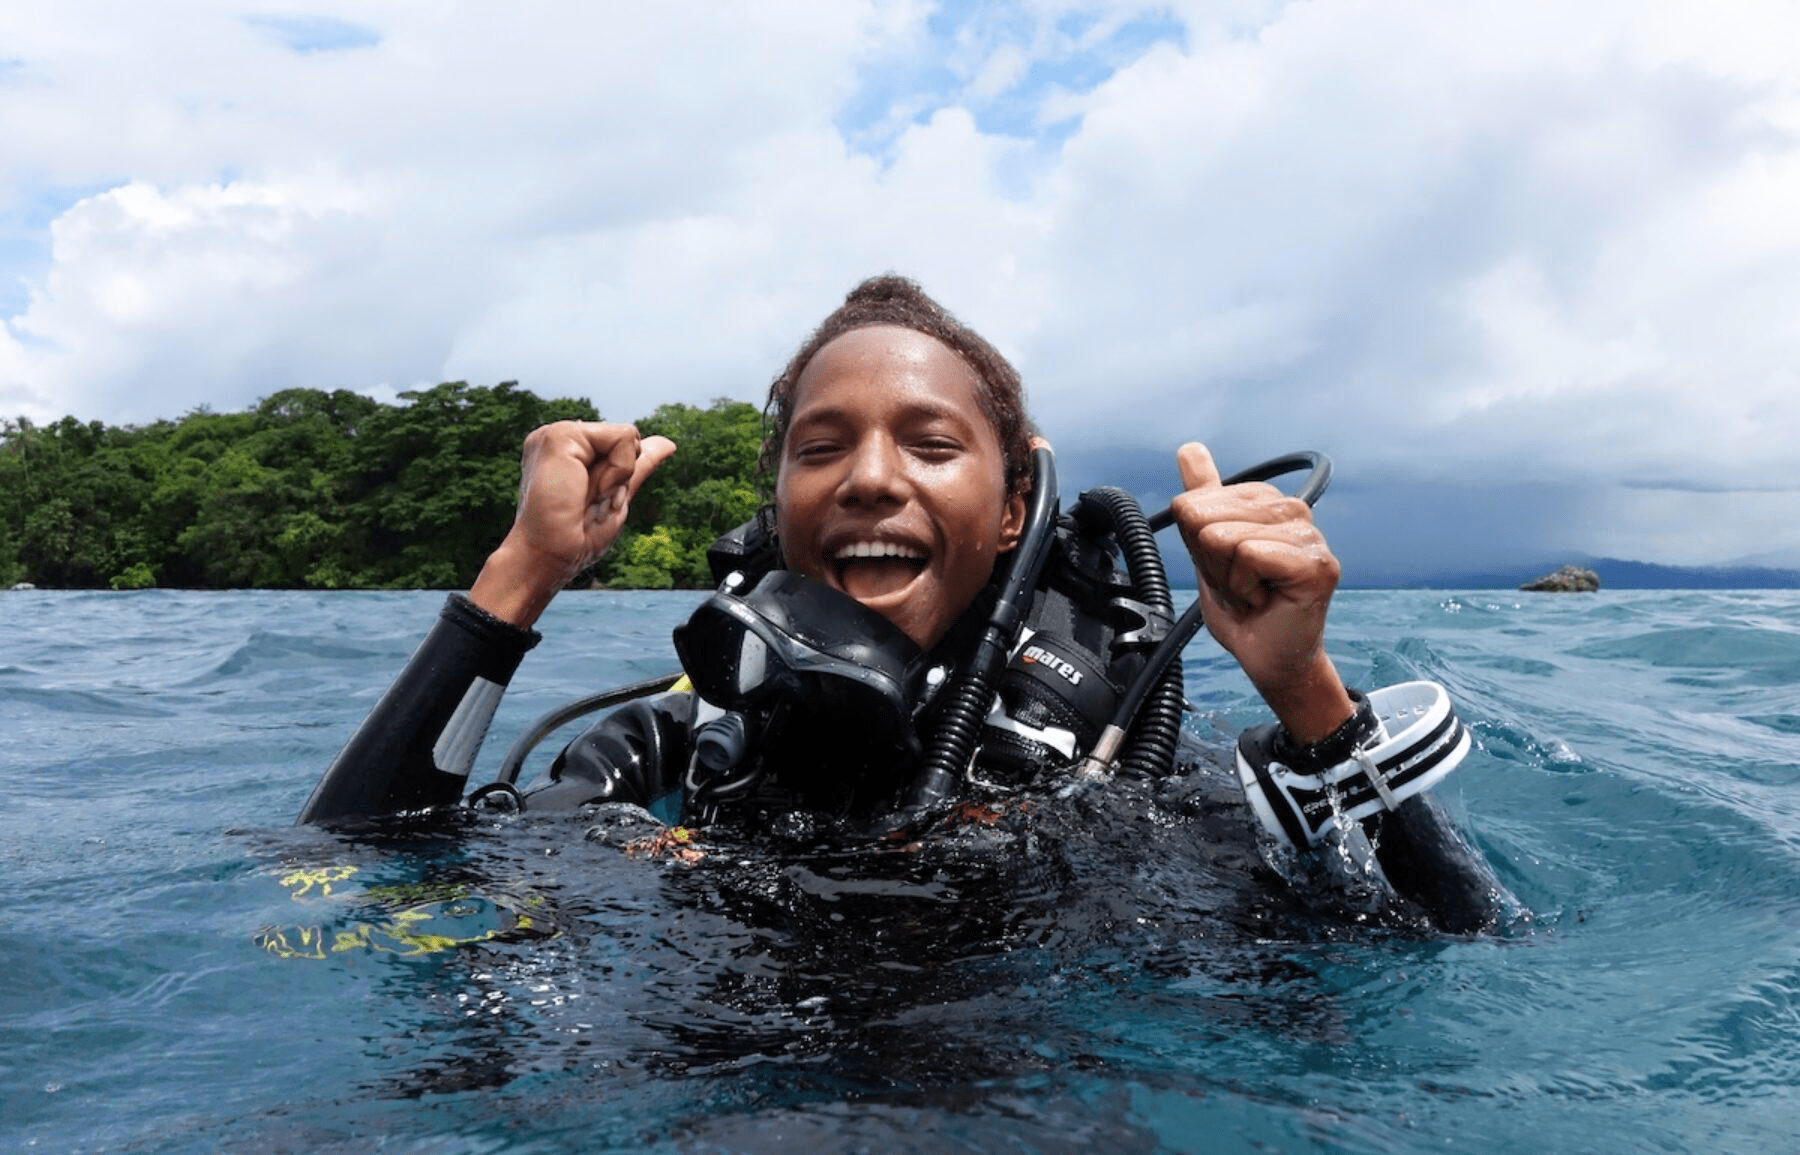 One of the Conservationists Naomi Longa
A  man in scuba gear coming up in the water smiling and cheering